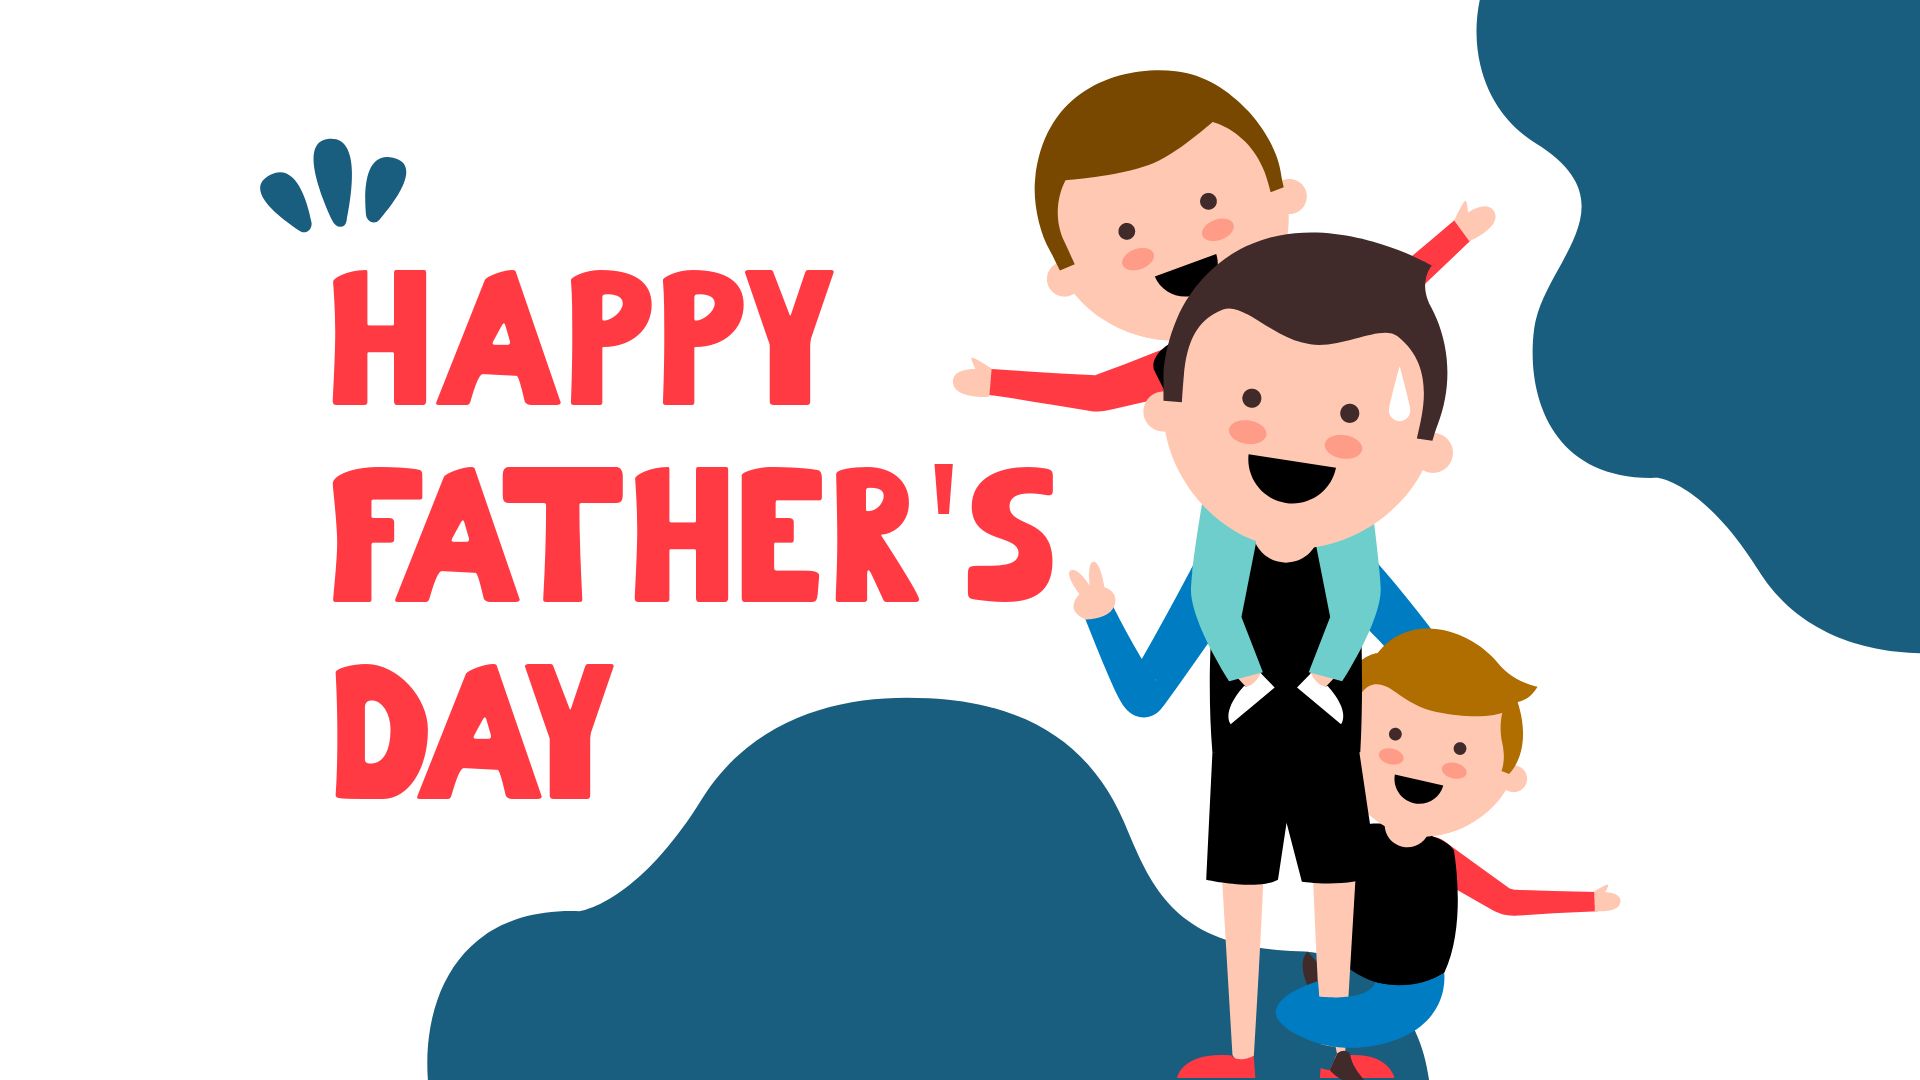 Free Funny Happy Father's Day Image - JPG 